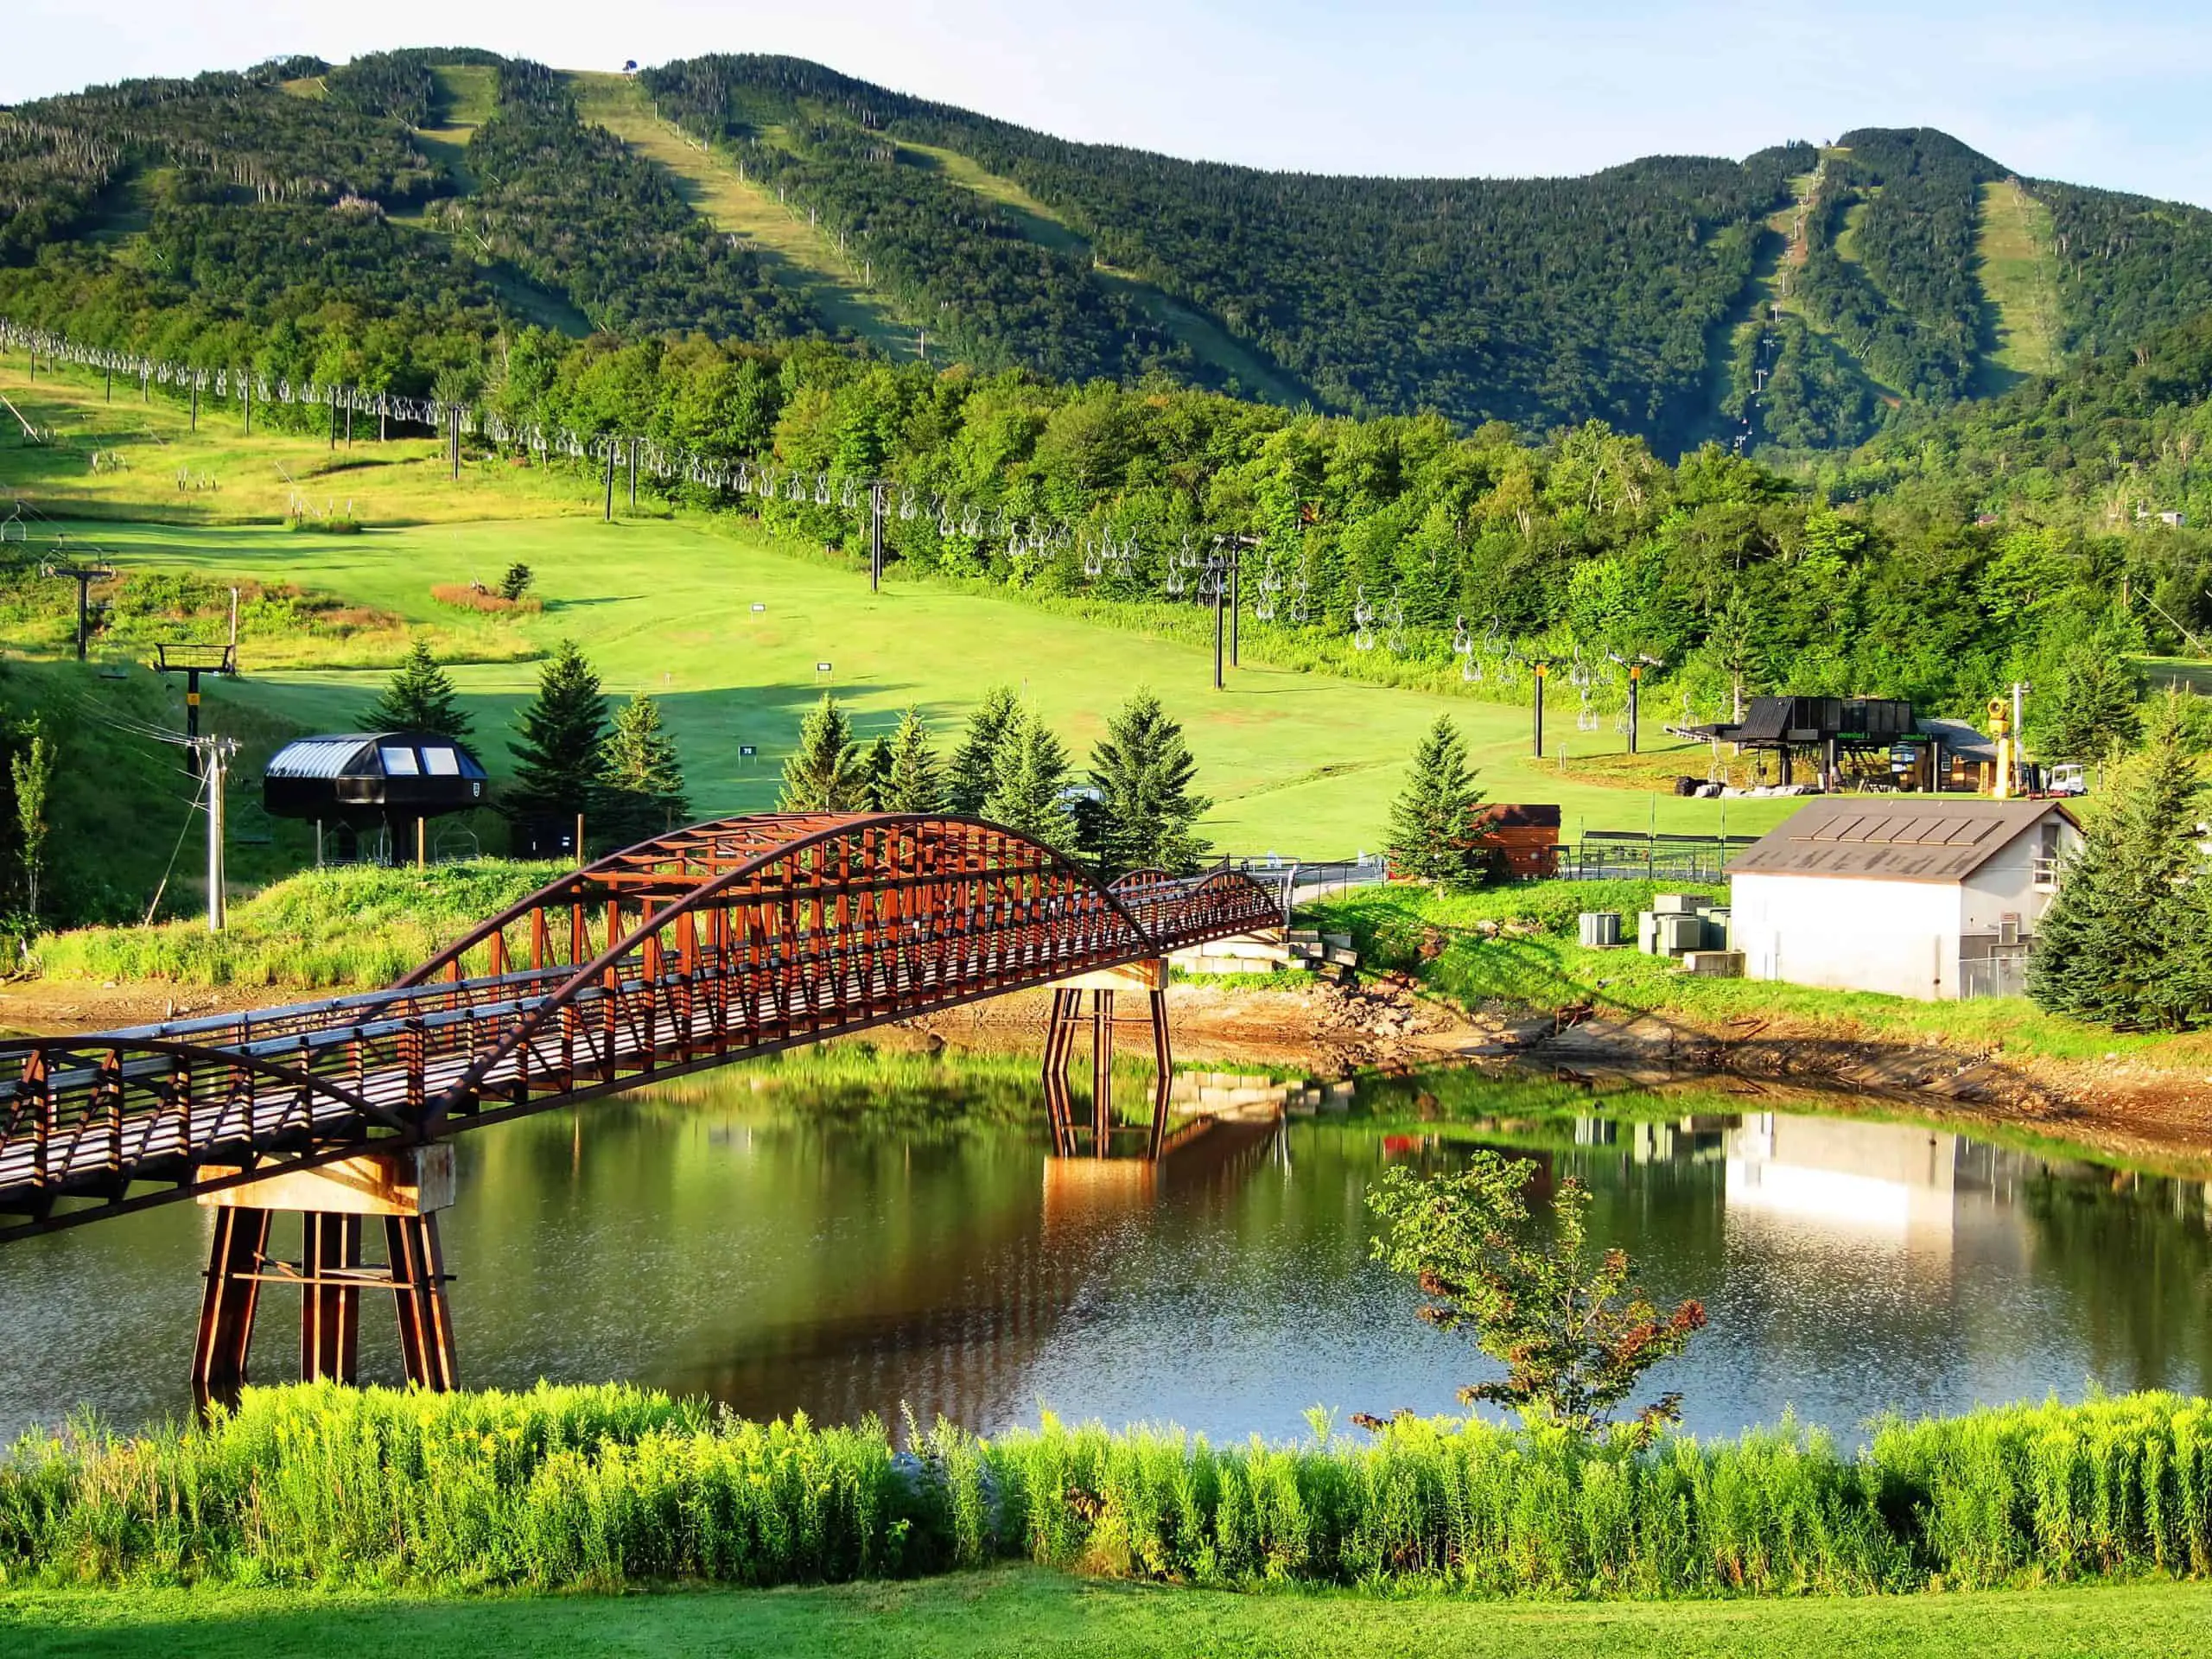 Vermont Green Mountains with a red metal bridge crossing the river and a white building